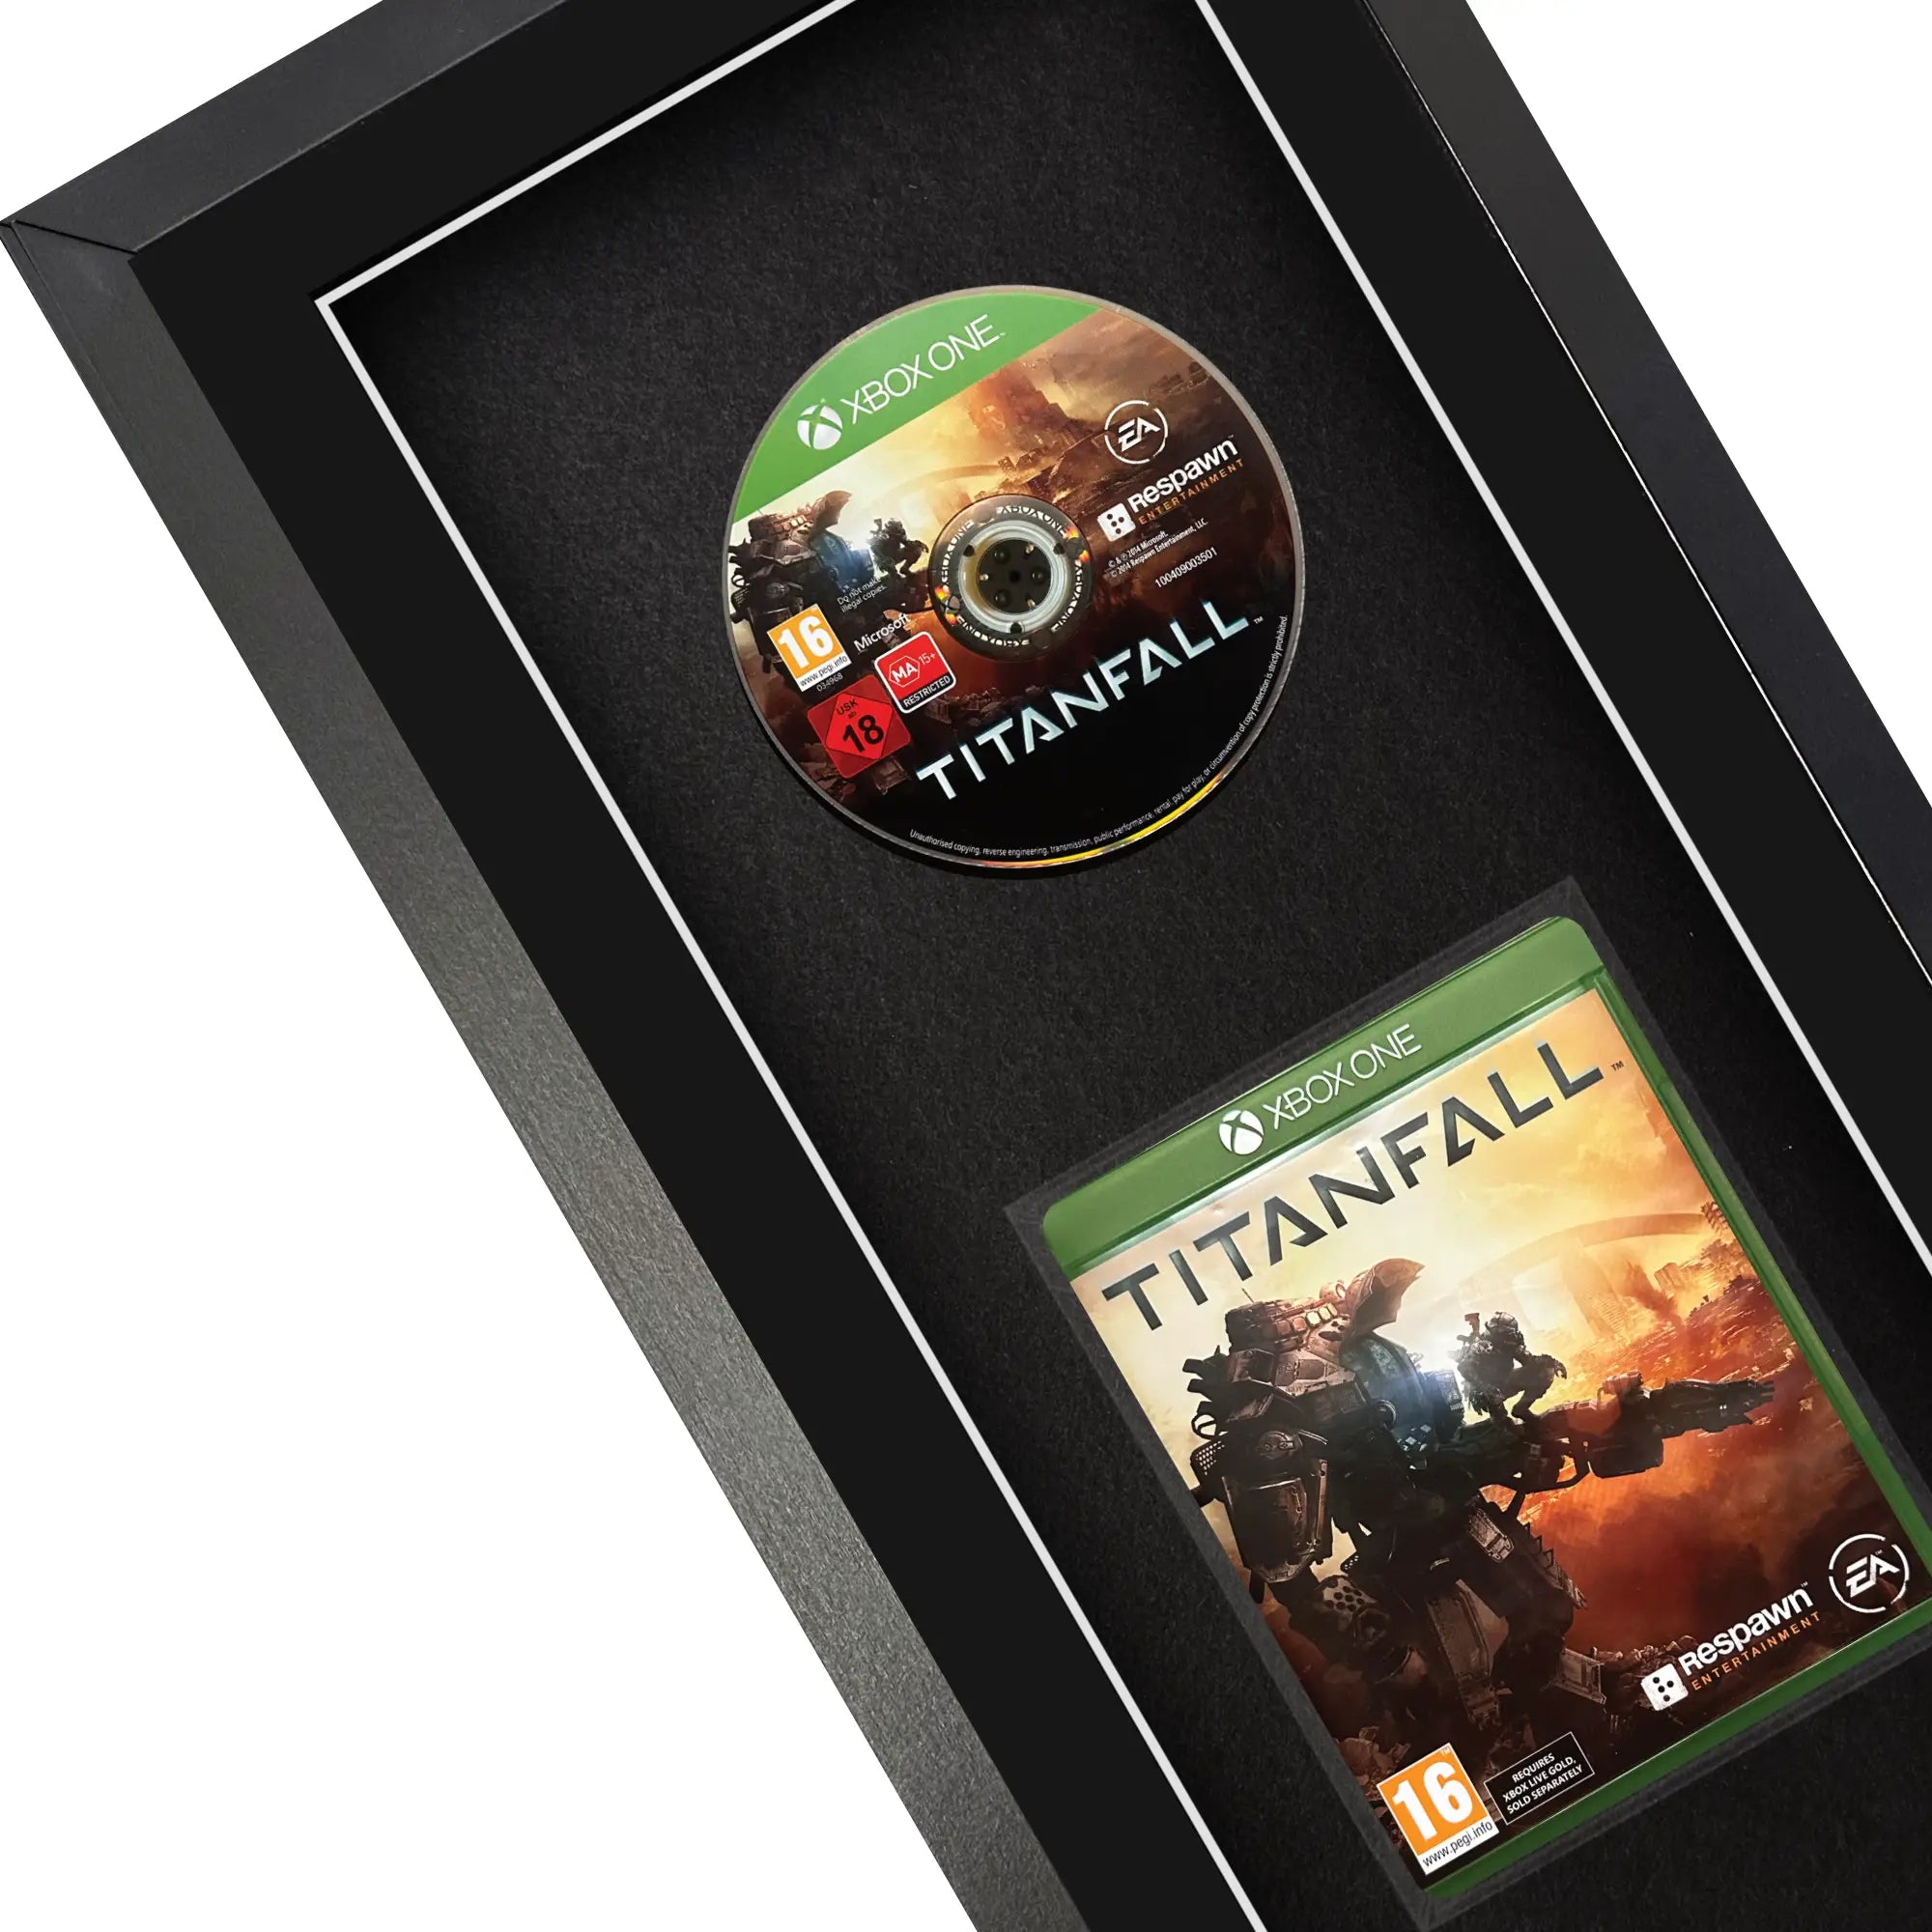 Frame your own Xbox One game to be displayed within a frame, the perfect way to showcase your game